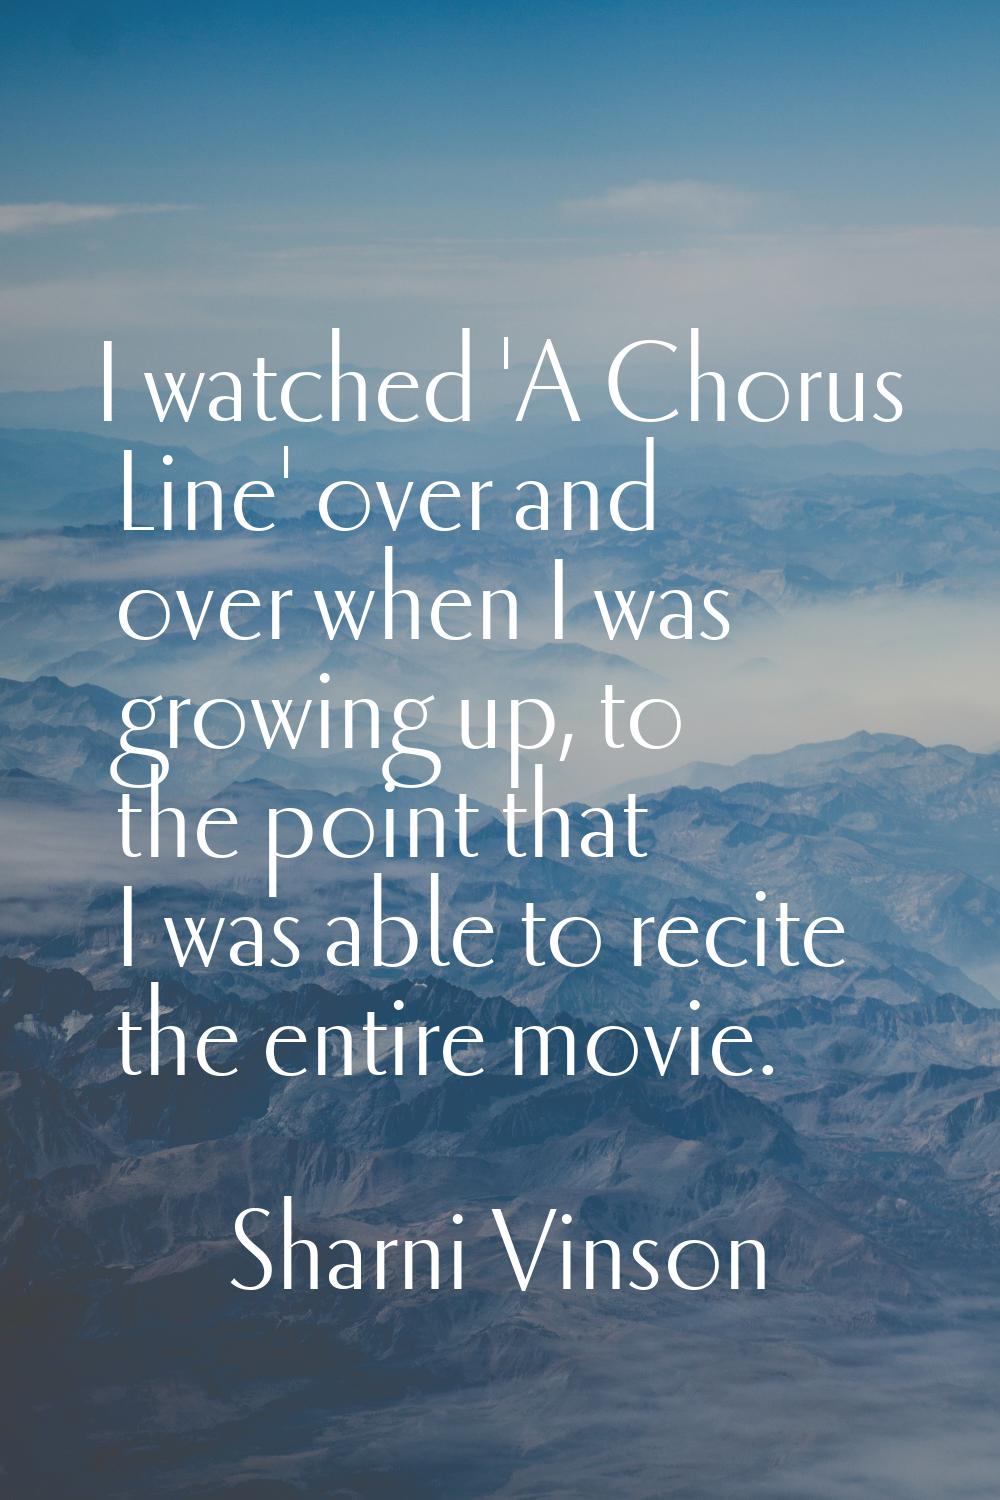 I watched 'A Chorus Line' over and over when I was growing up, to the point that I was able to reci